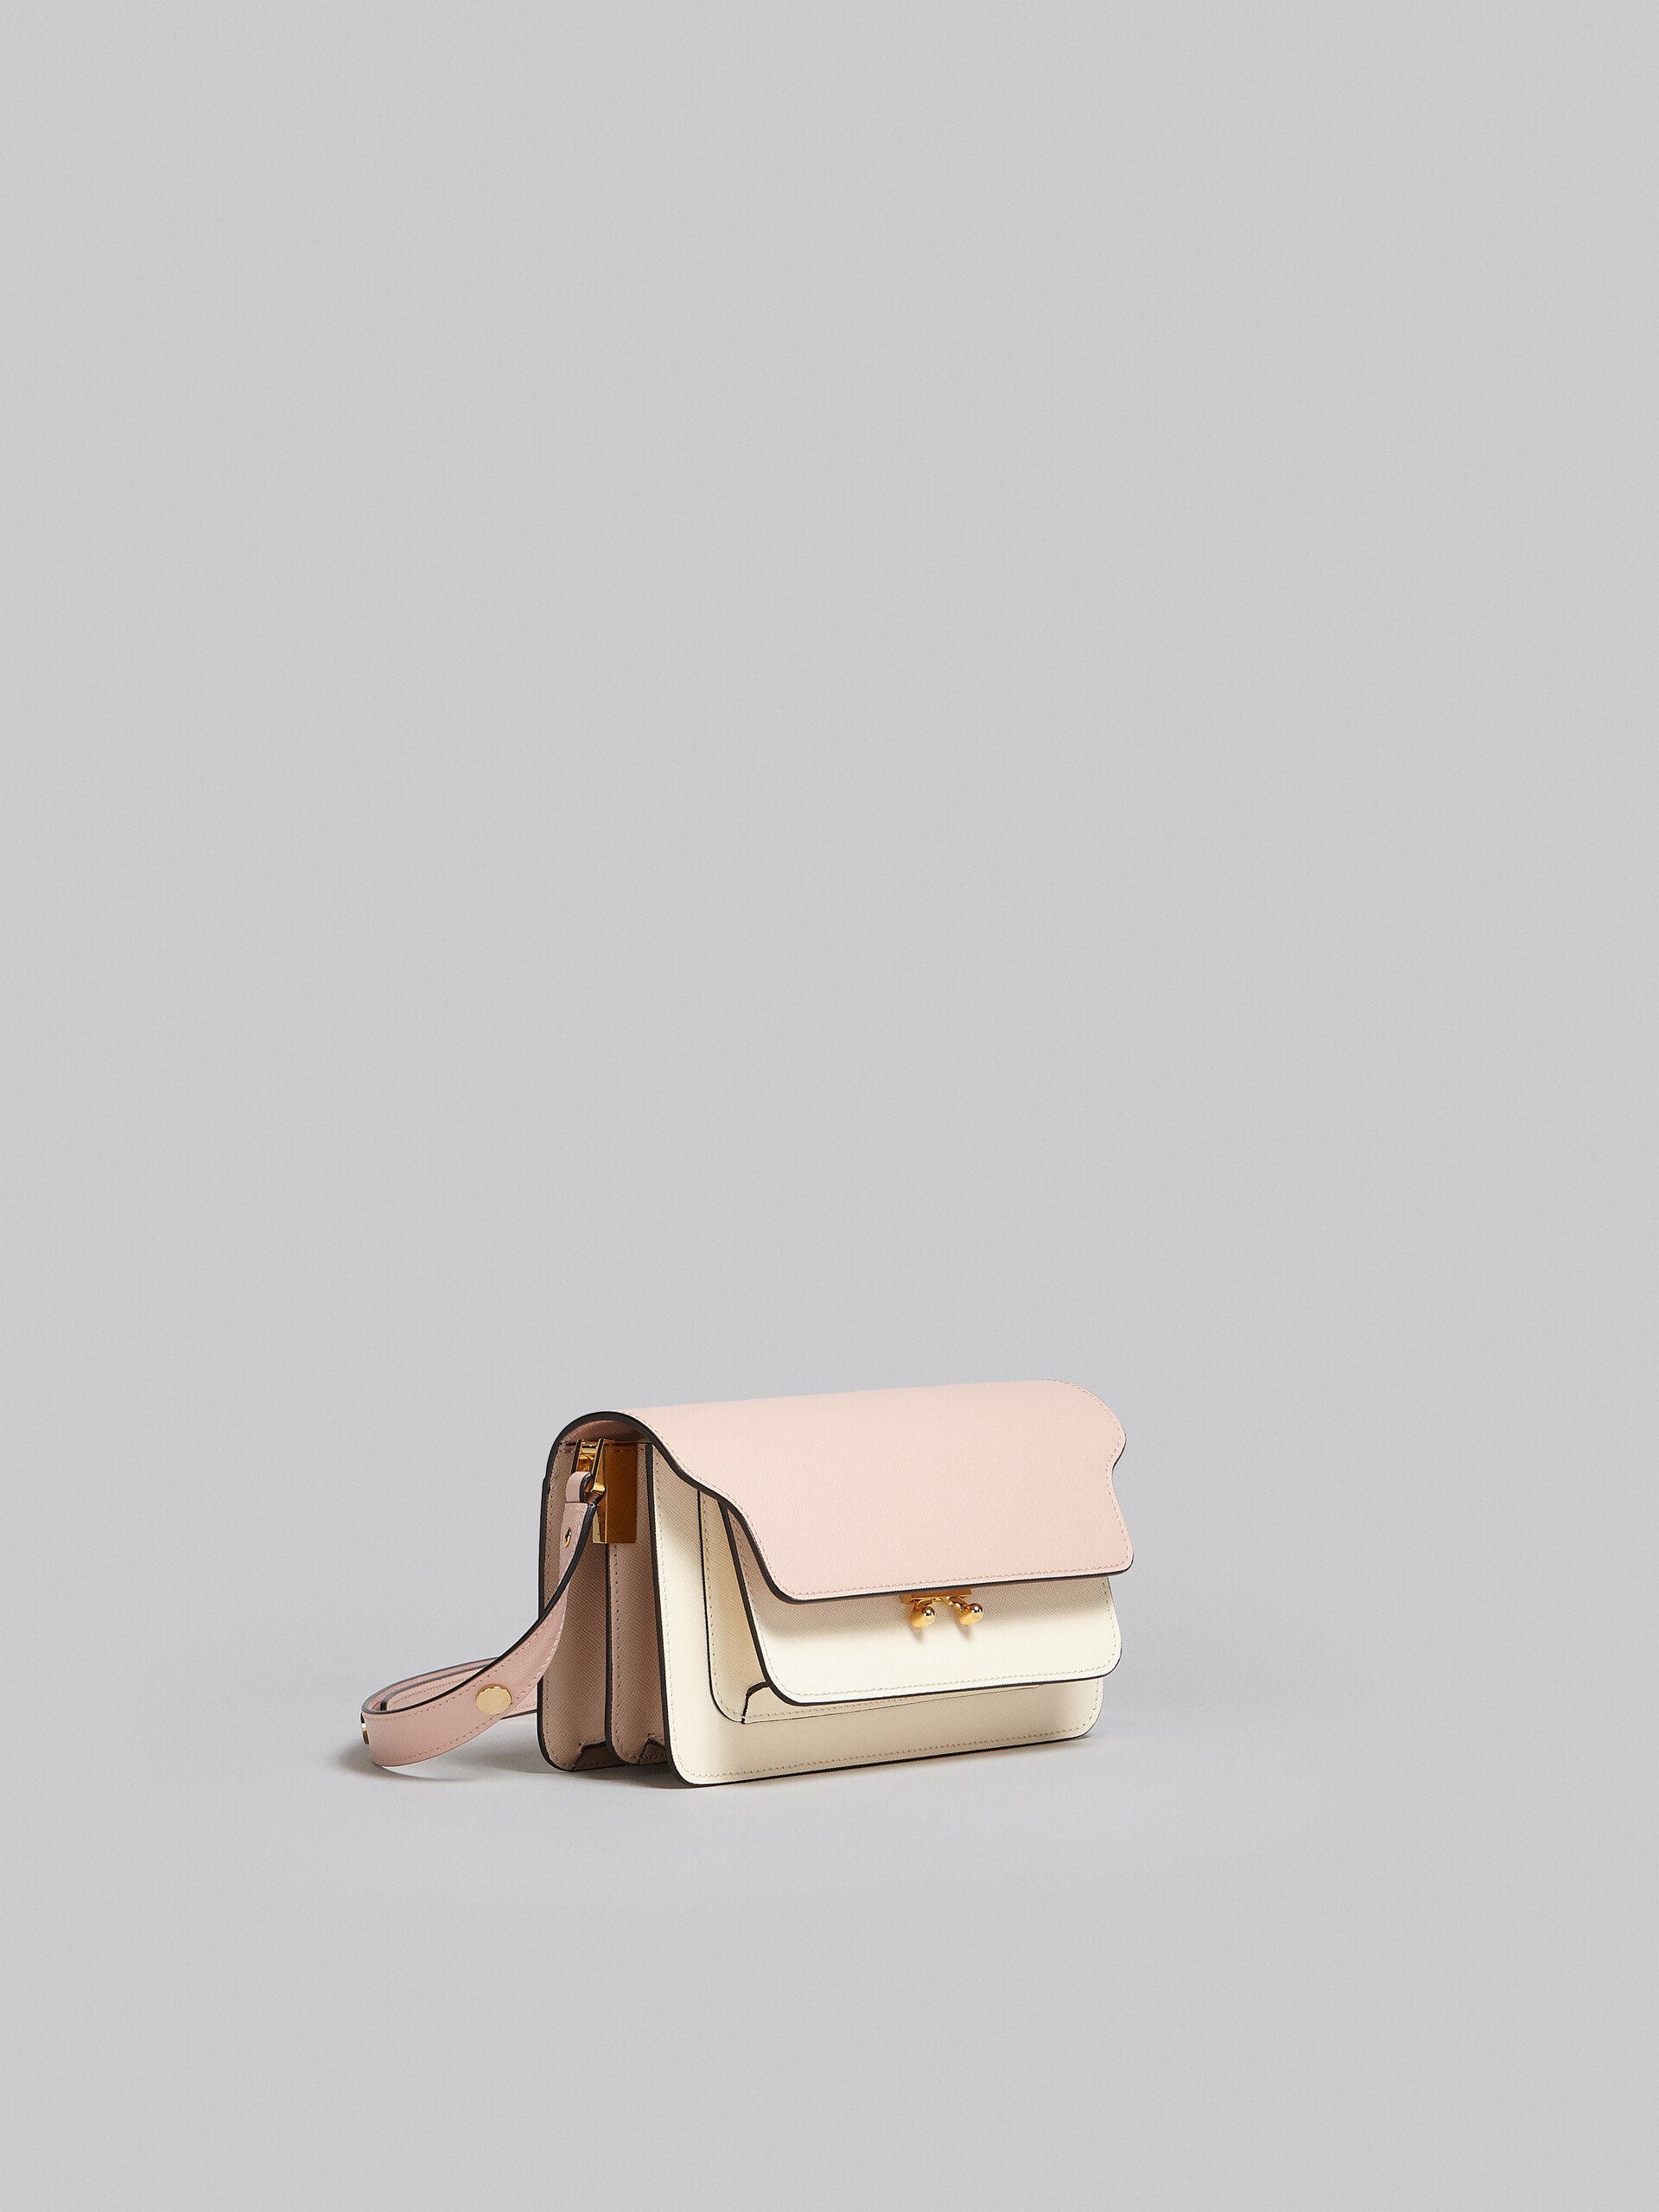 Trunk Bag E/W in pink and white saffiano leather - Shoulder Bags - Image 6